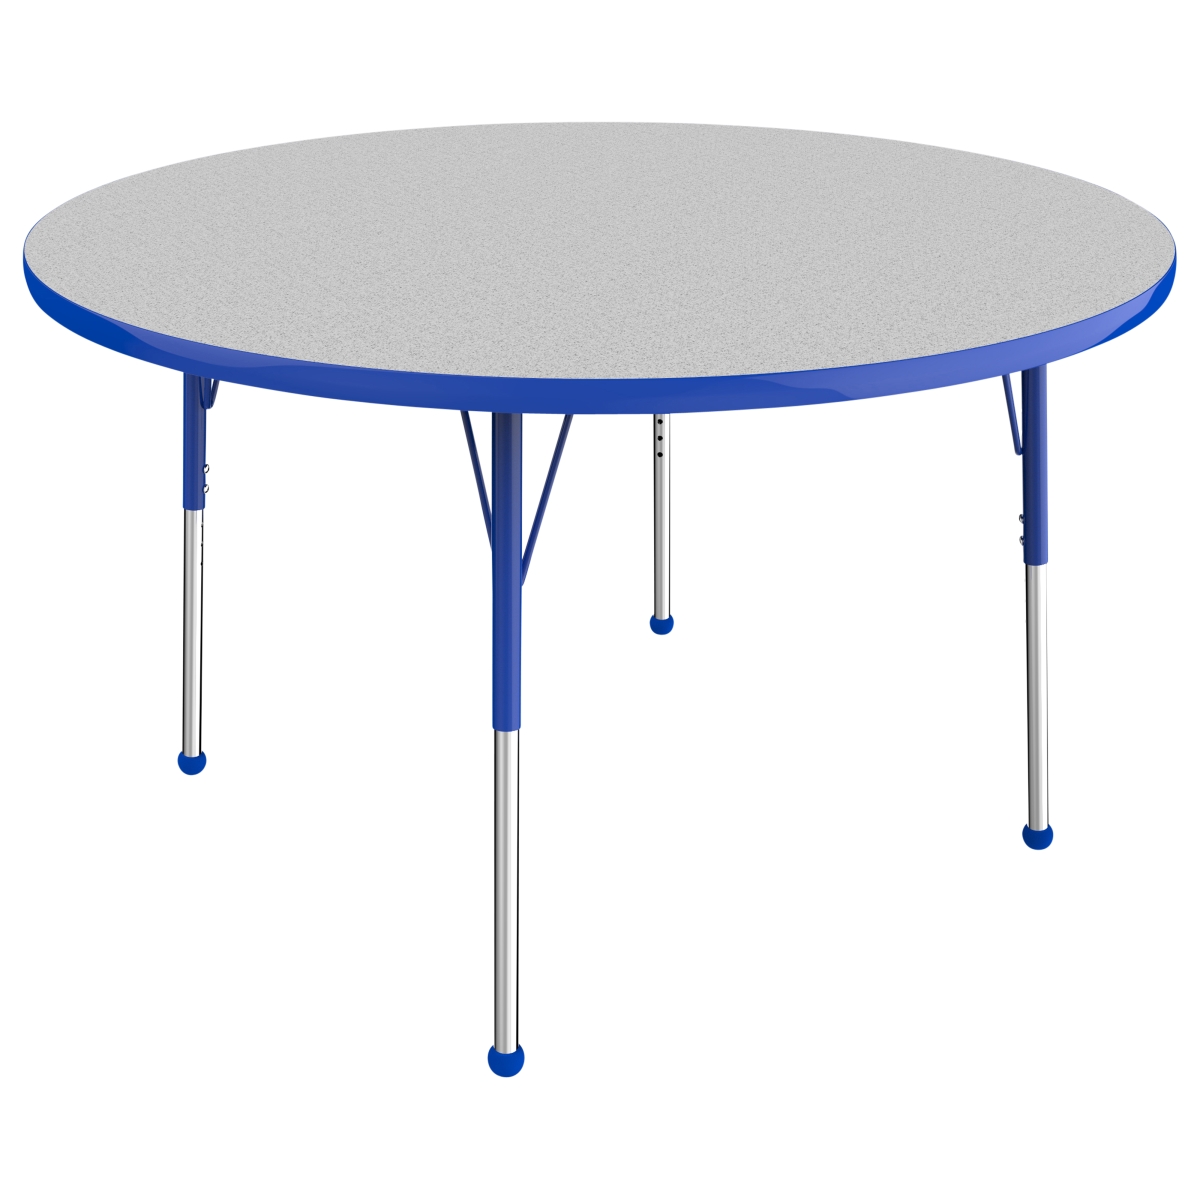 10044-gybl 48 In. Round T-mold Adjustable Activity Table With Standard Ball - Grey & Blue